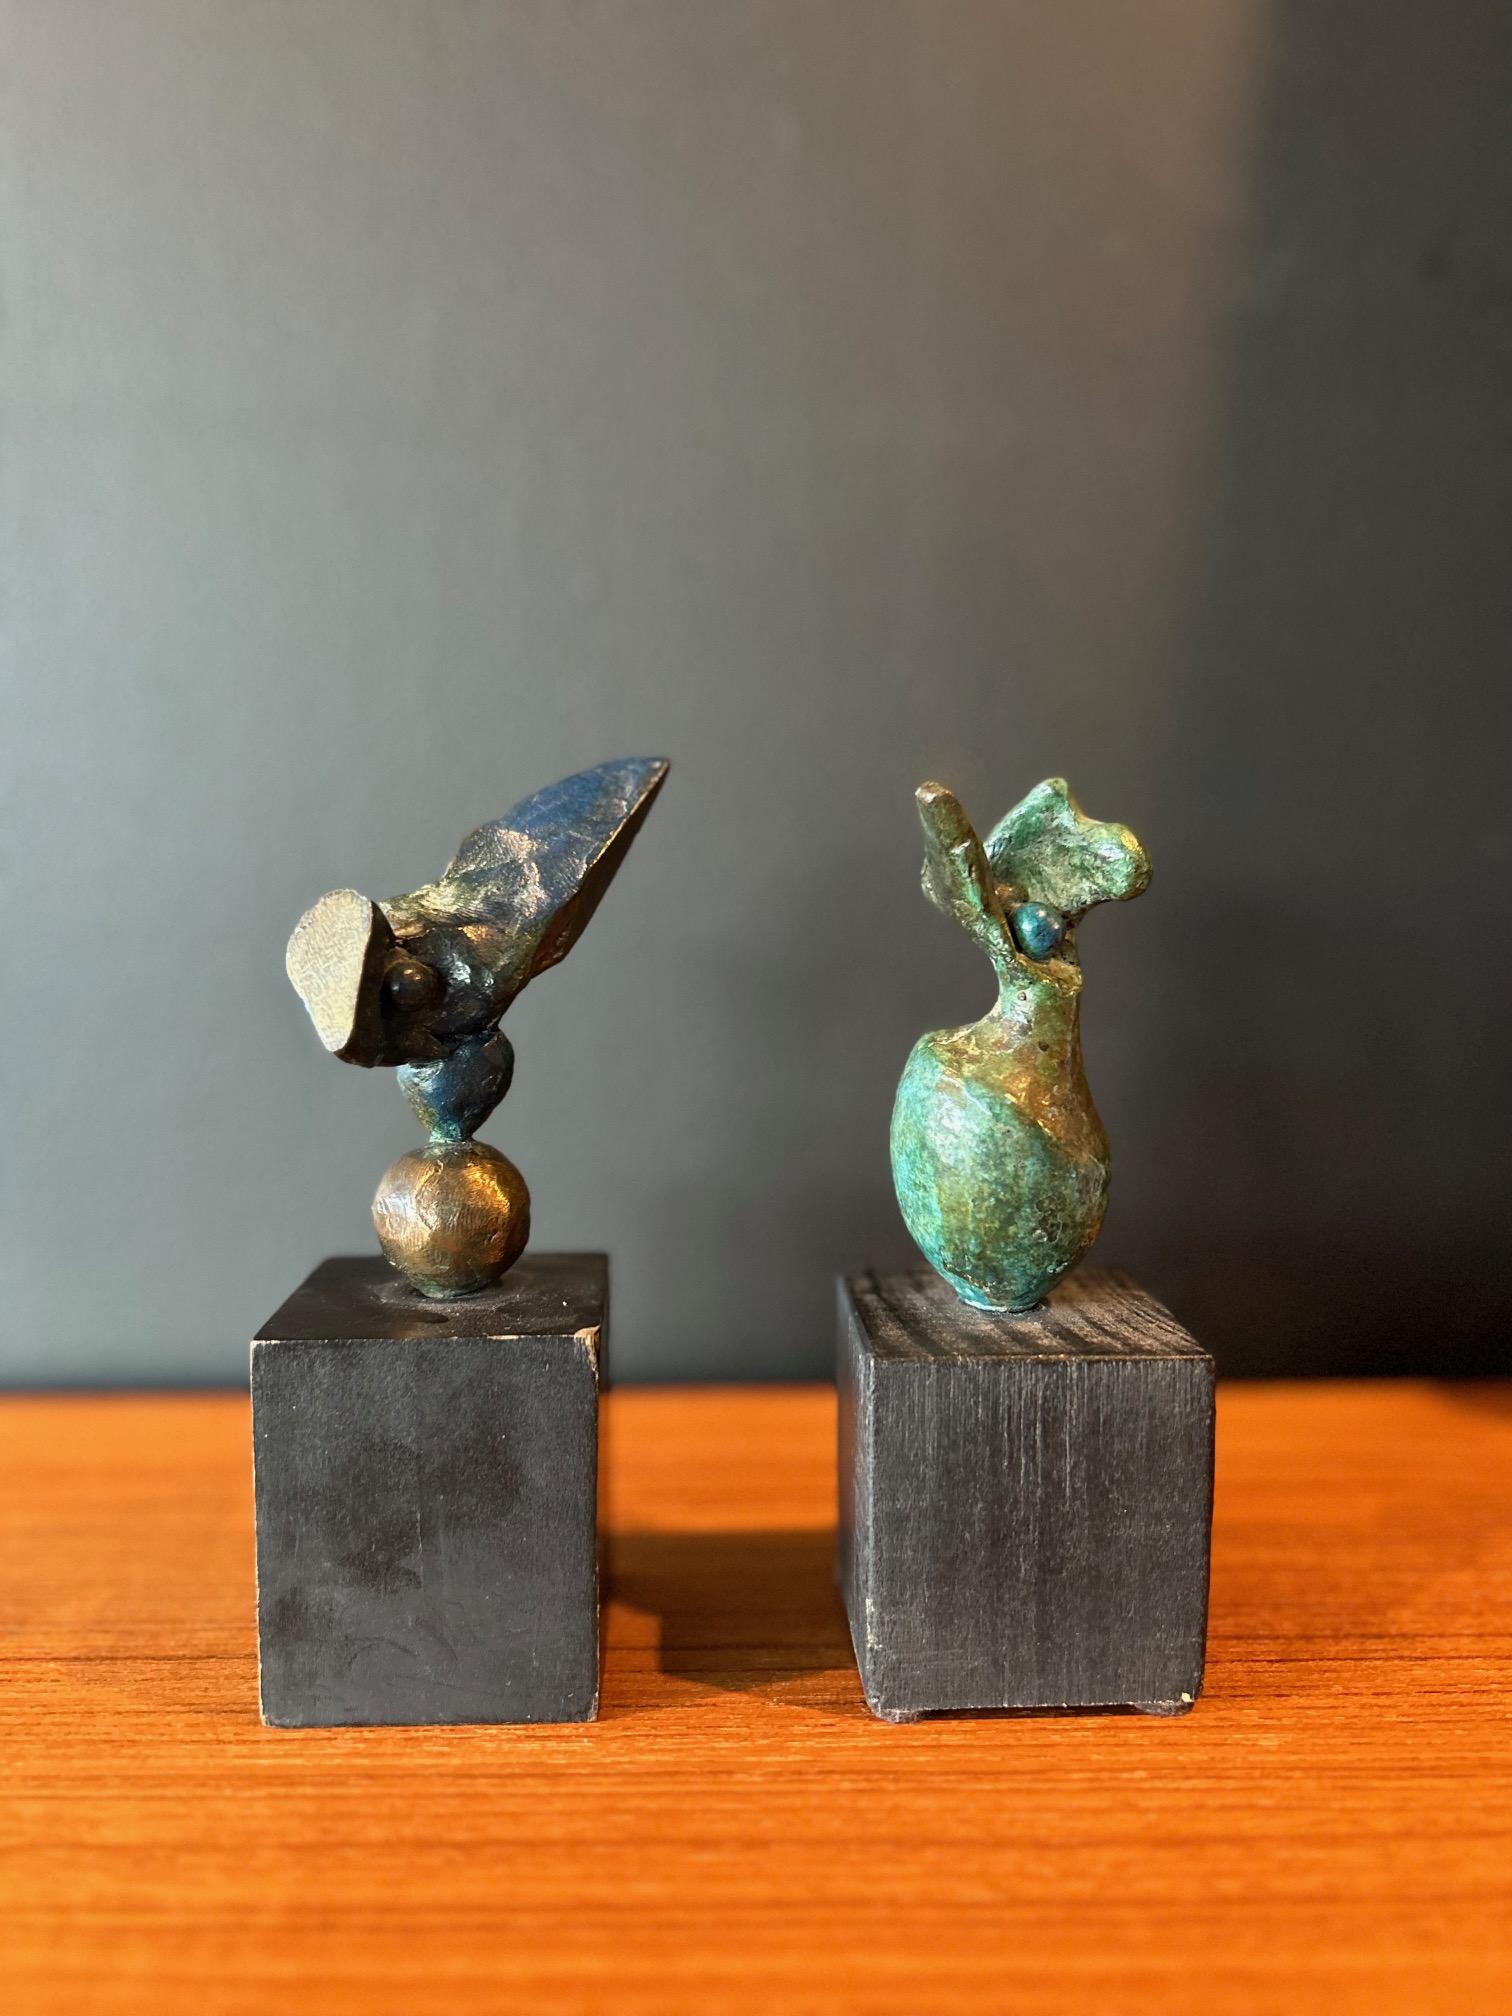 Set of two small abstract bronze sculptures in deep teal/turquoise tones by artist Donald Locke set on black square wood bases. One of the organic forms is punctuated by shapes featuring a polished metallic splice and the other teal figure bears two